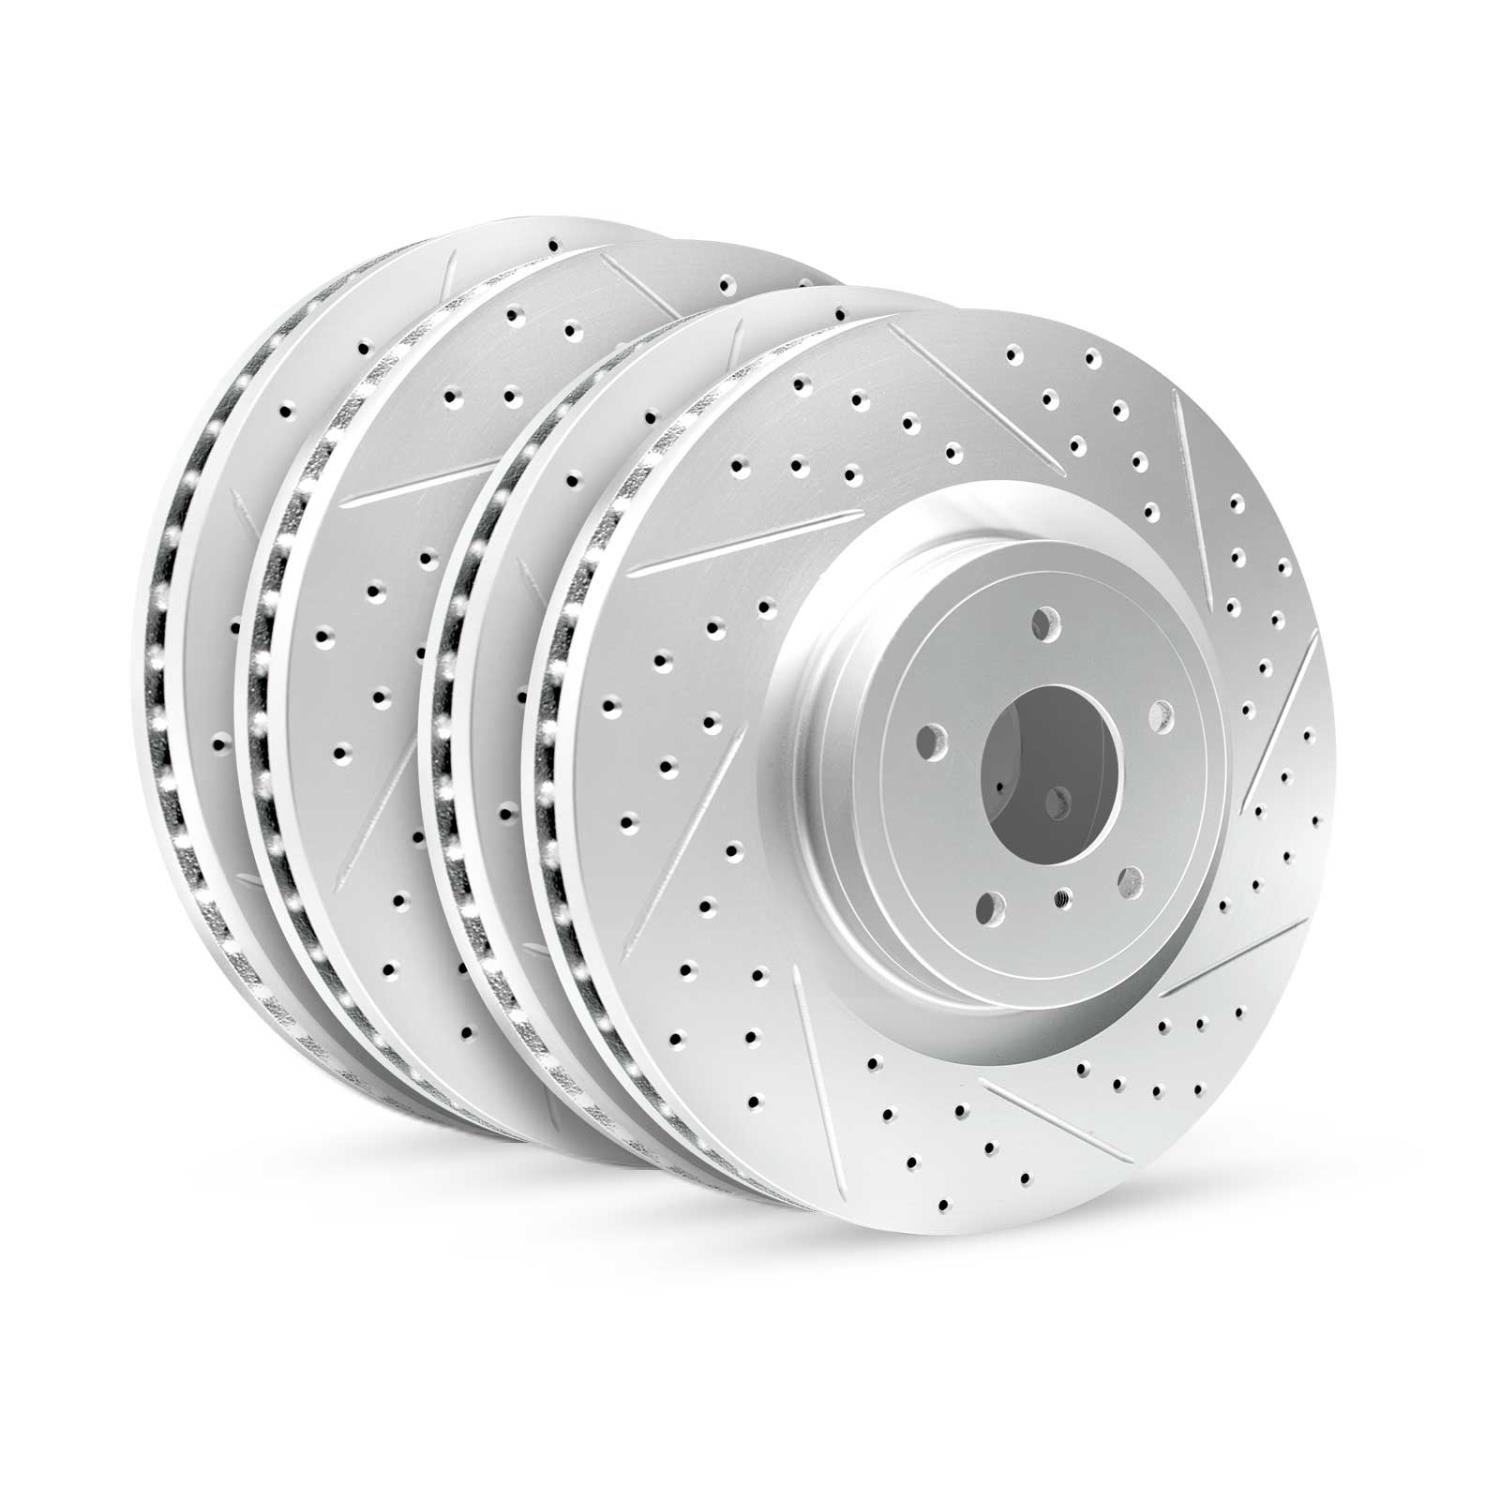 GEO-Carbon Drilled/Slotted Rotors, 2003-2004 Mitsubishi, Position: Front/Rear